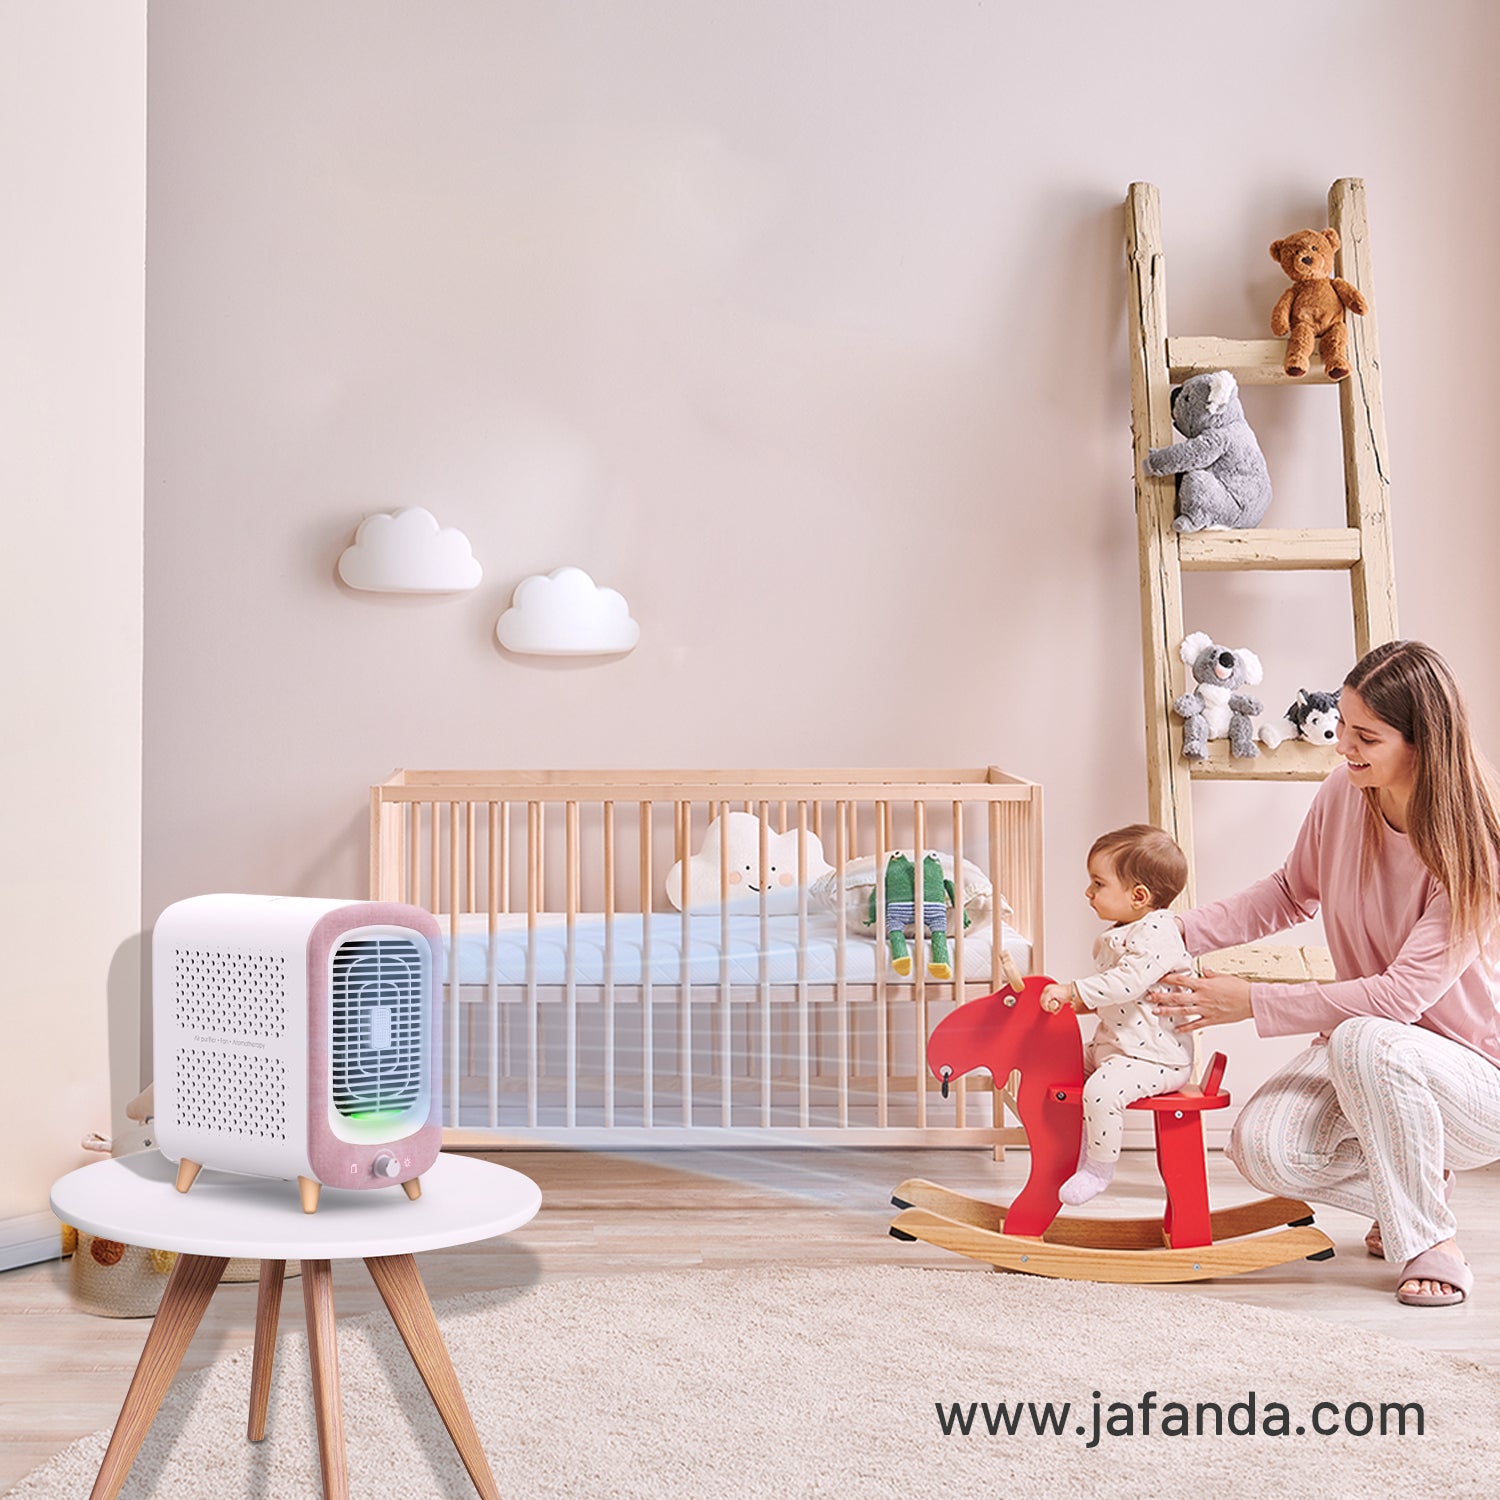 Show Mom You Care: Jafanda Air Purifiers' Mother's Day Special Offer & Surprise Gifts!